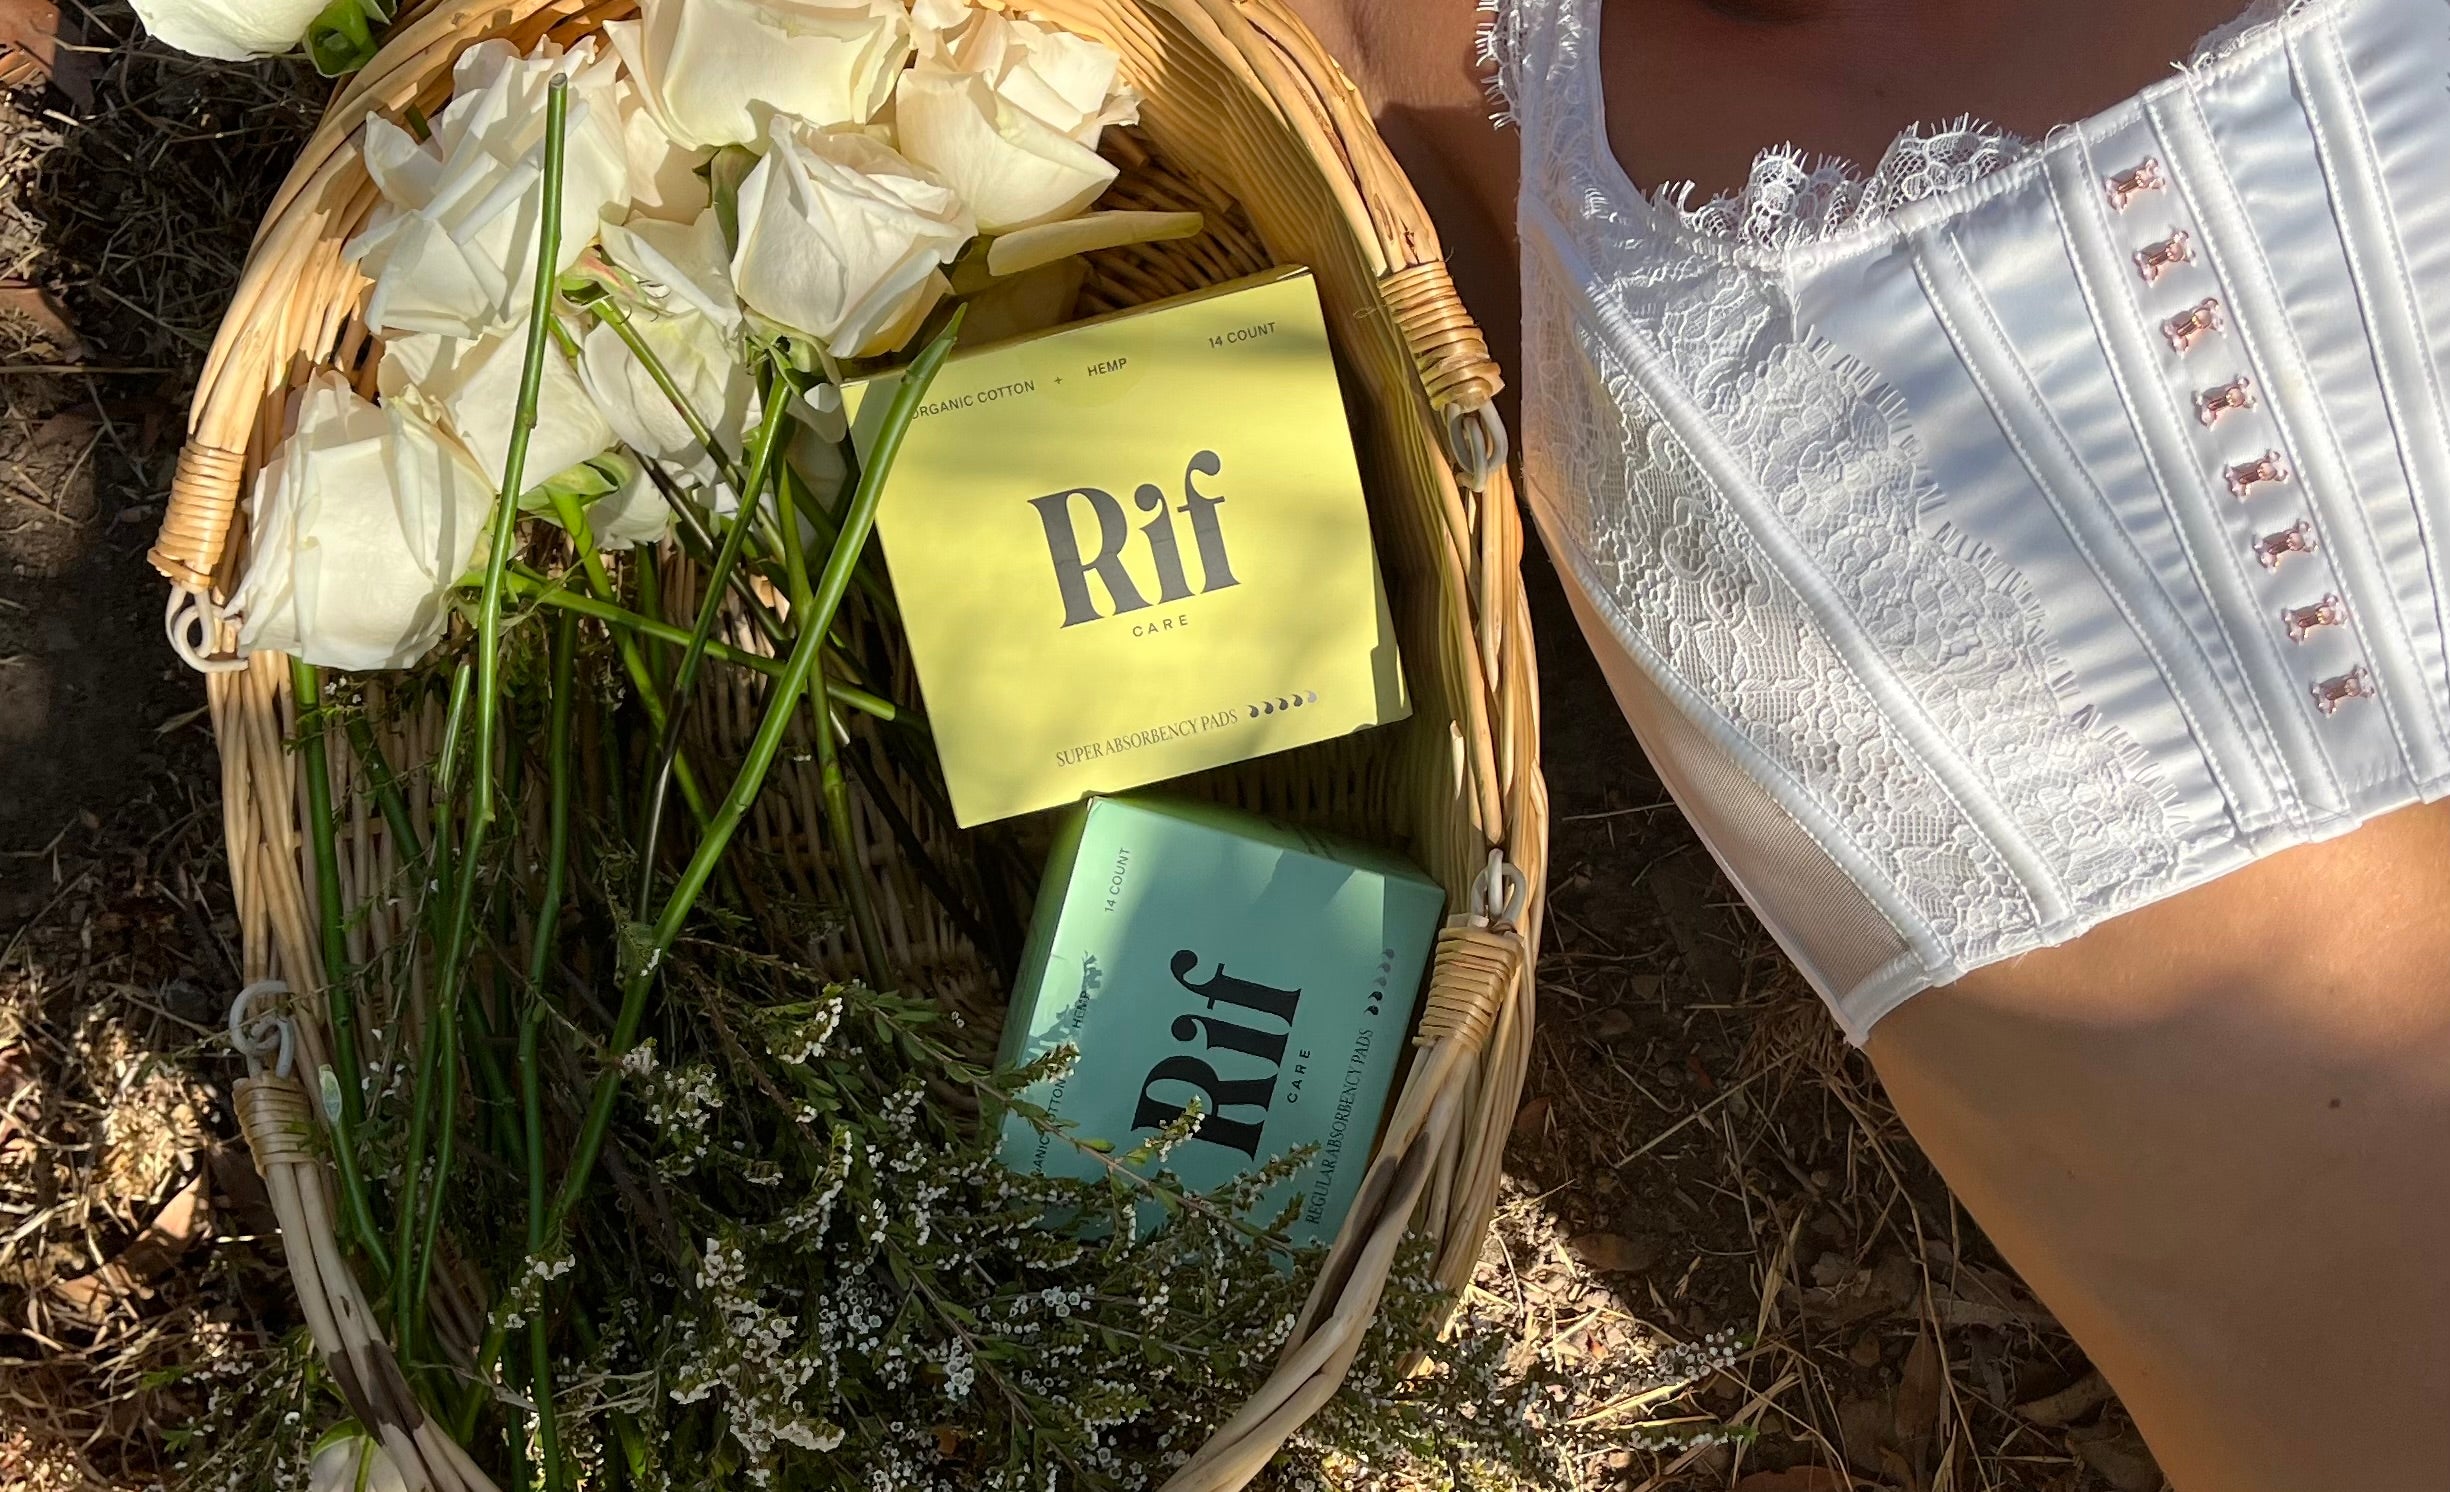 You read that right! Rif Care pads and tampons are now available